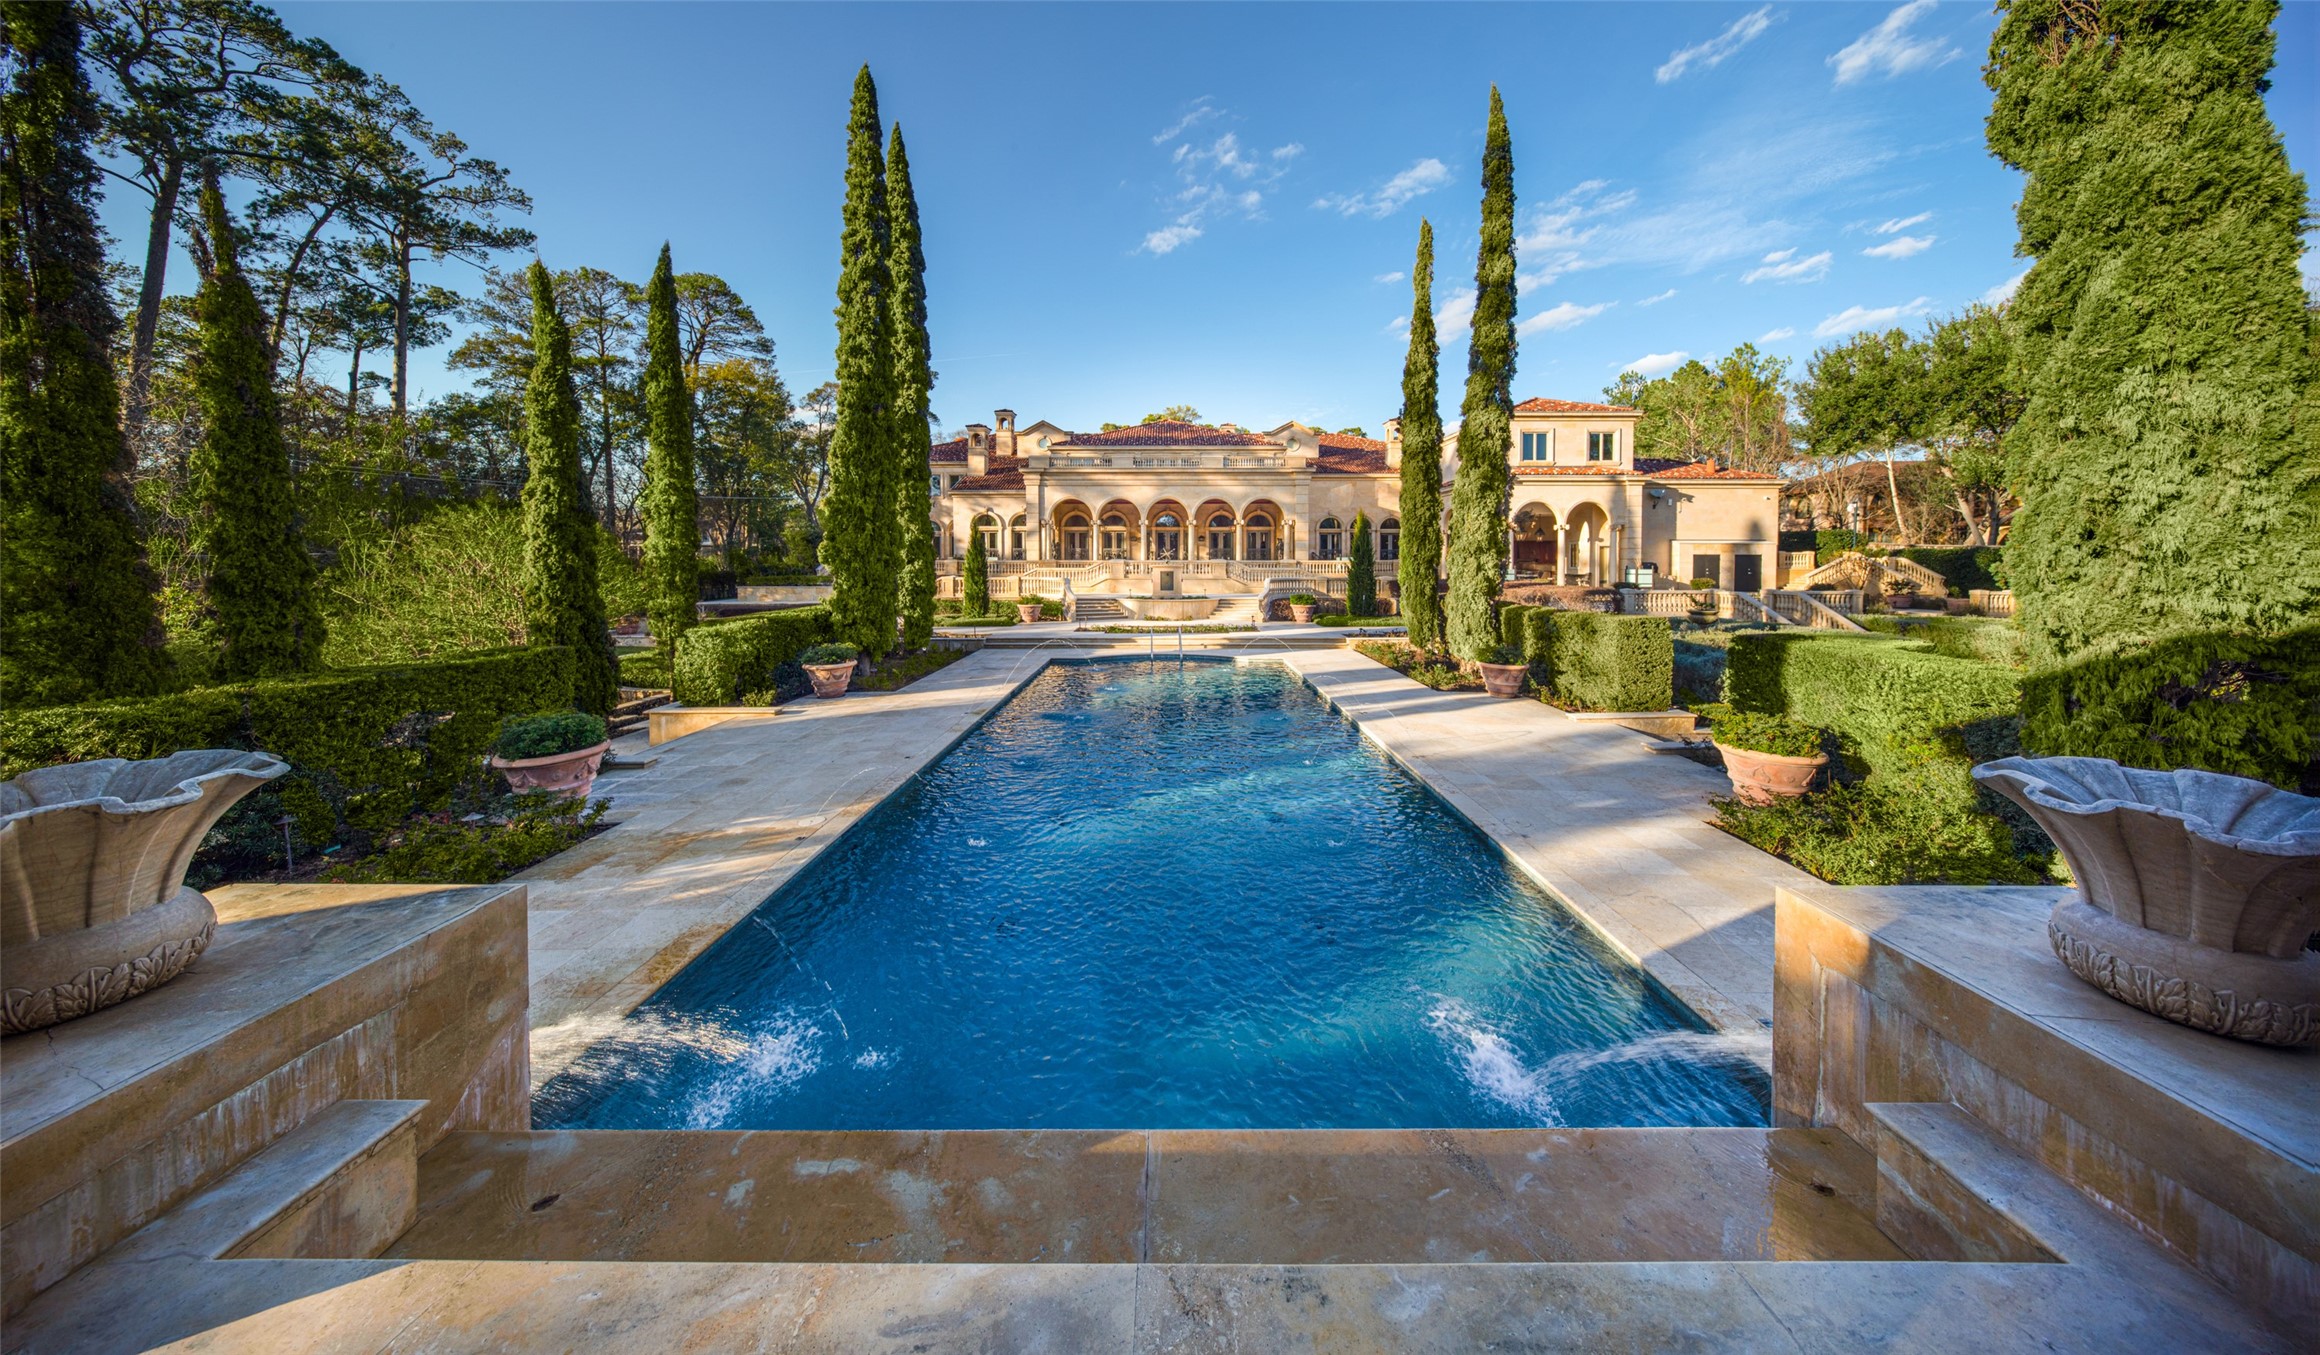 A centerpiece Parisian-styled Pool flanked by soaring arborvitae anchors the rear grounds of this magnificent 2.32-acre estate; conceived as Les Tuileries, with tiered marble terraces and staircases, overlooking a verdant wonderland below, all designed to transport mind and spirit. Home  Sweet Home at The Estate at 100 Carnarvon